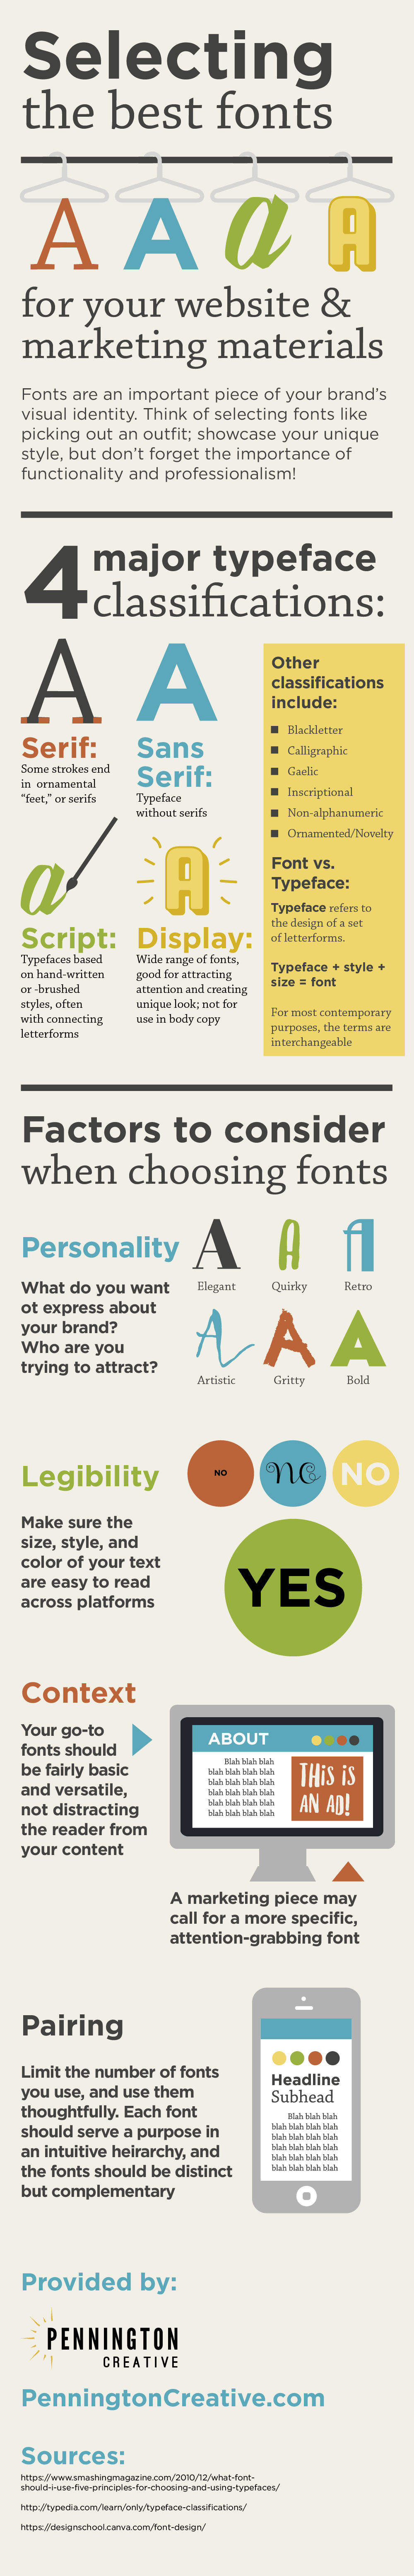 Selecting The Best Fonts